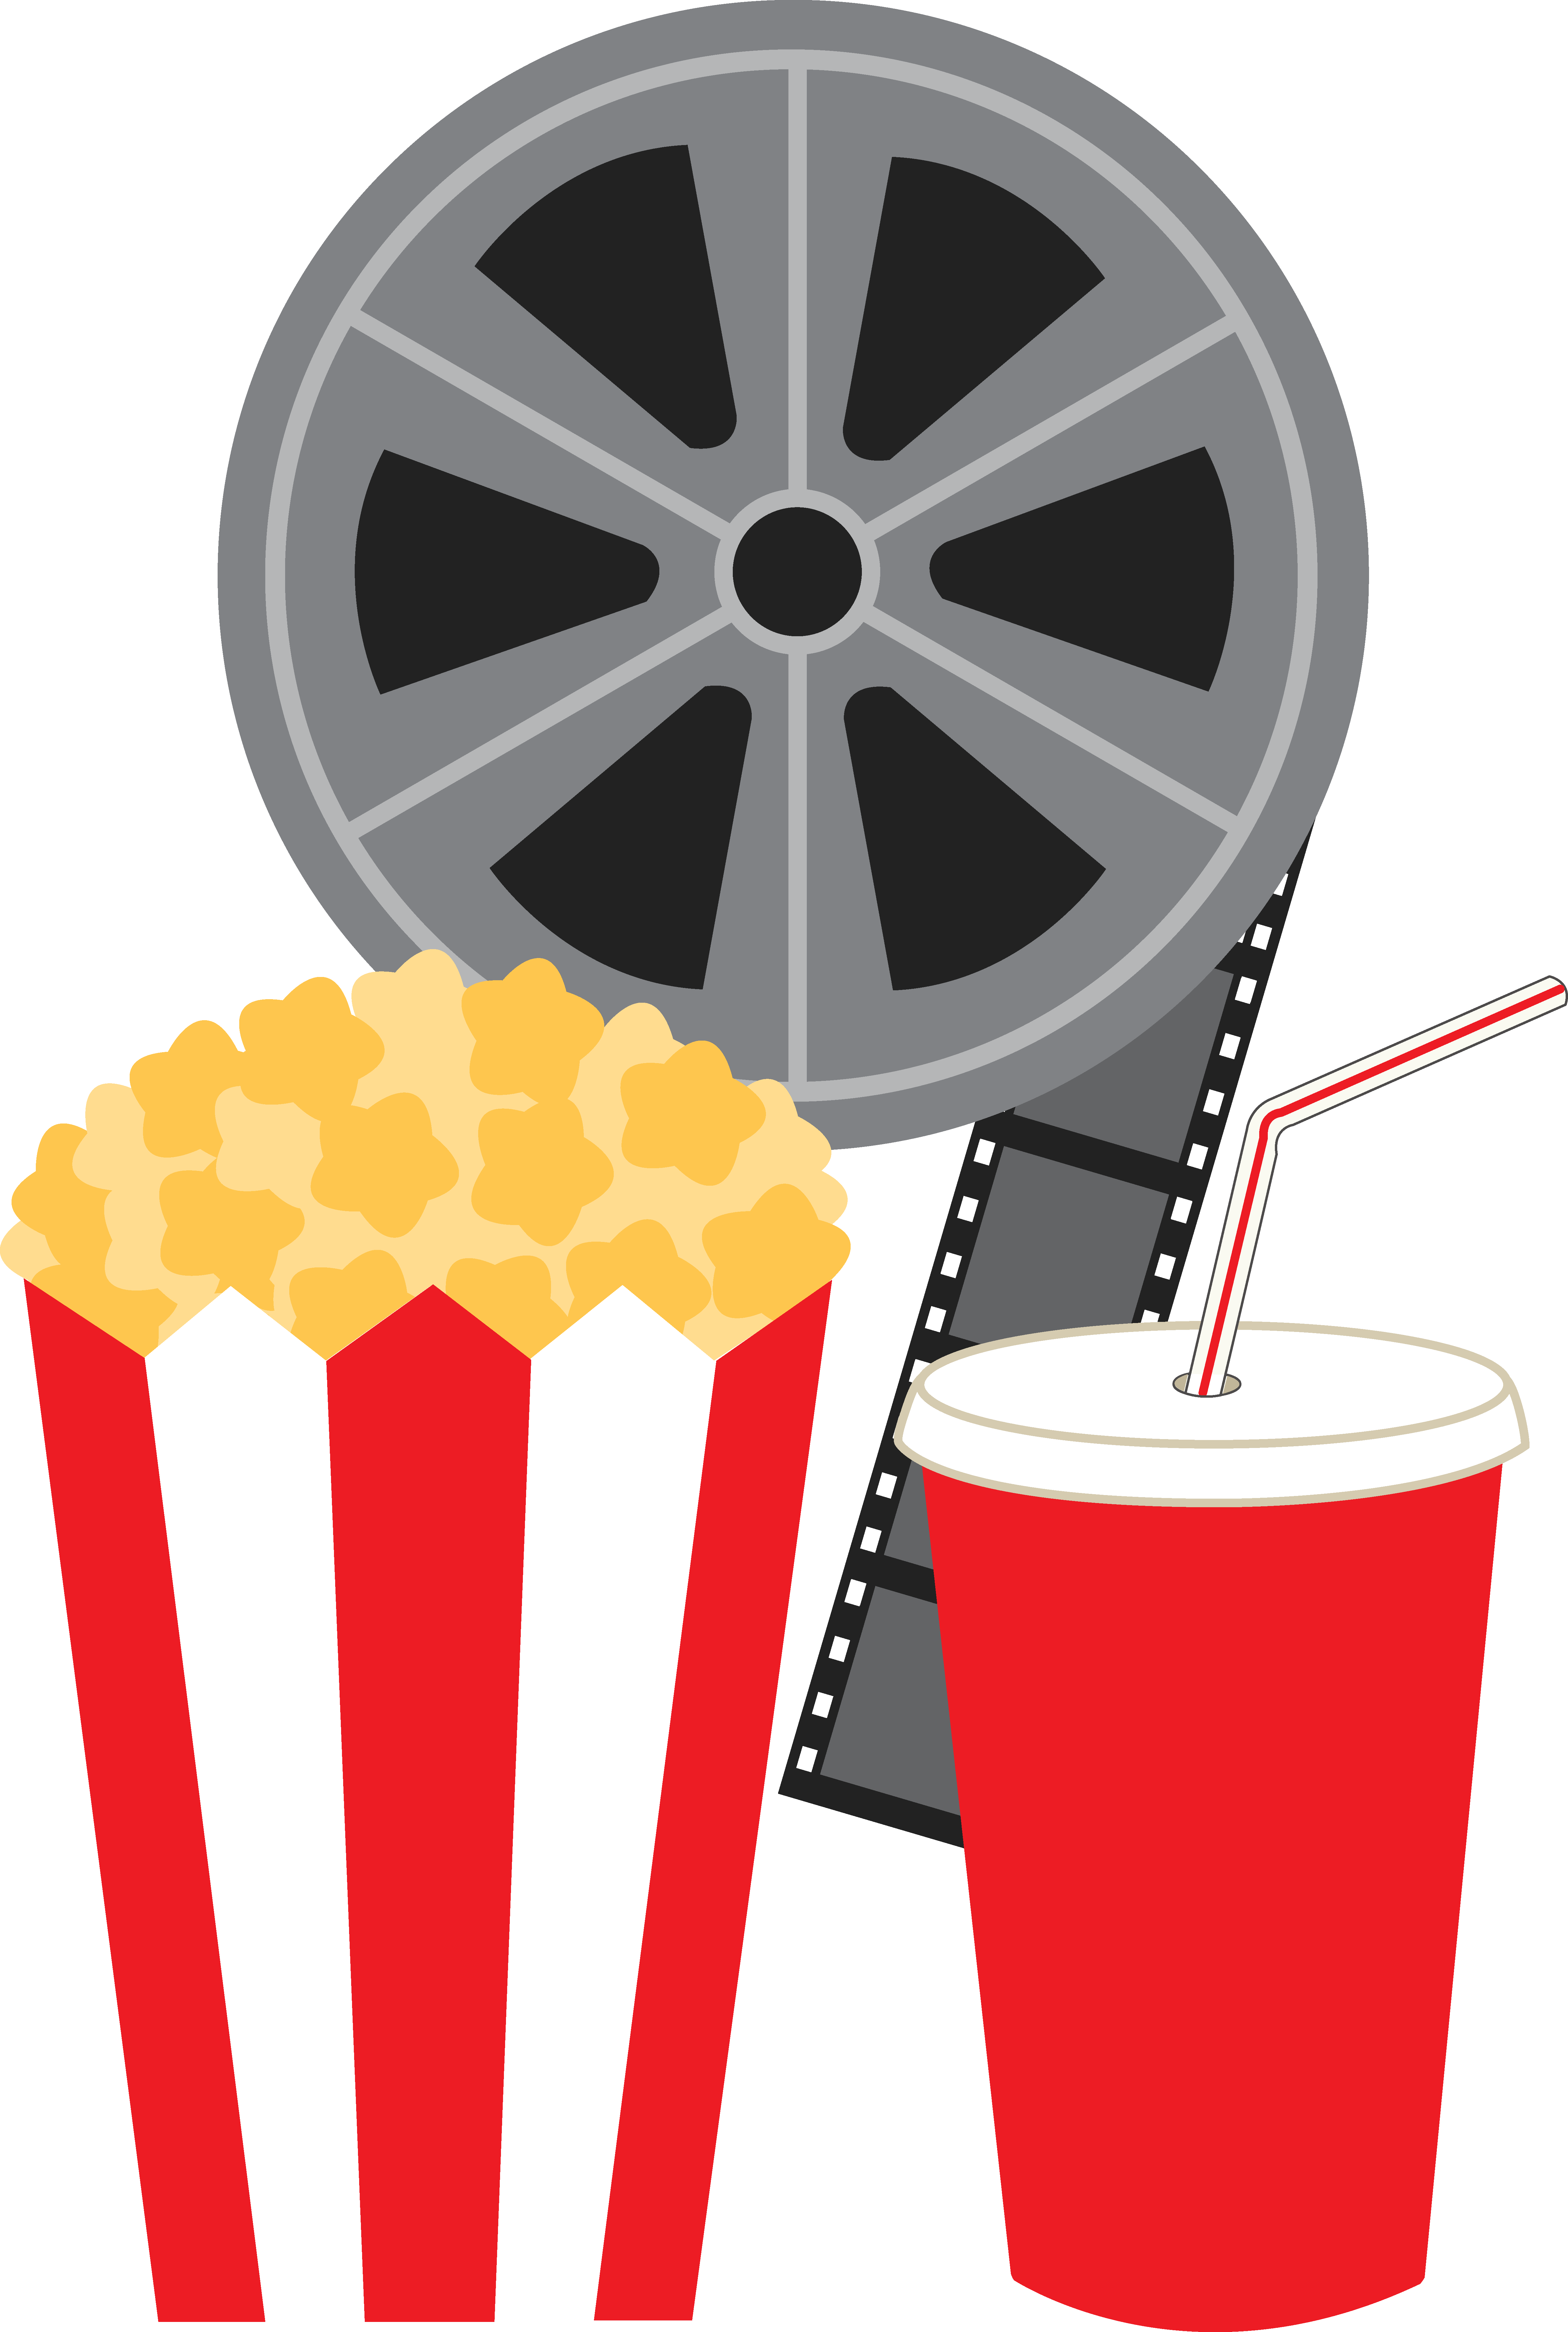 Free clip art stickers. Ticket clipart theater ticket